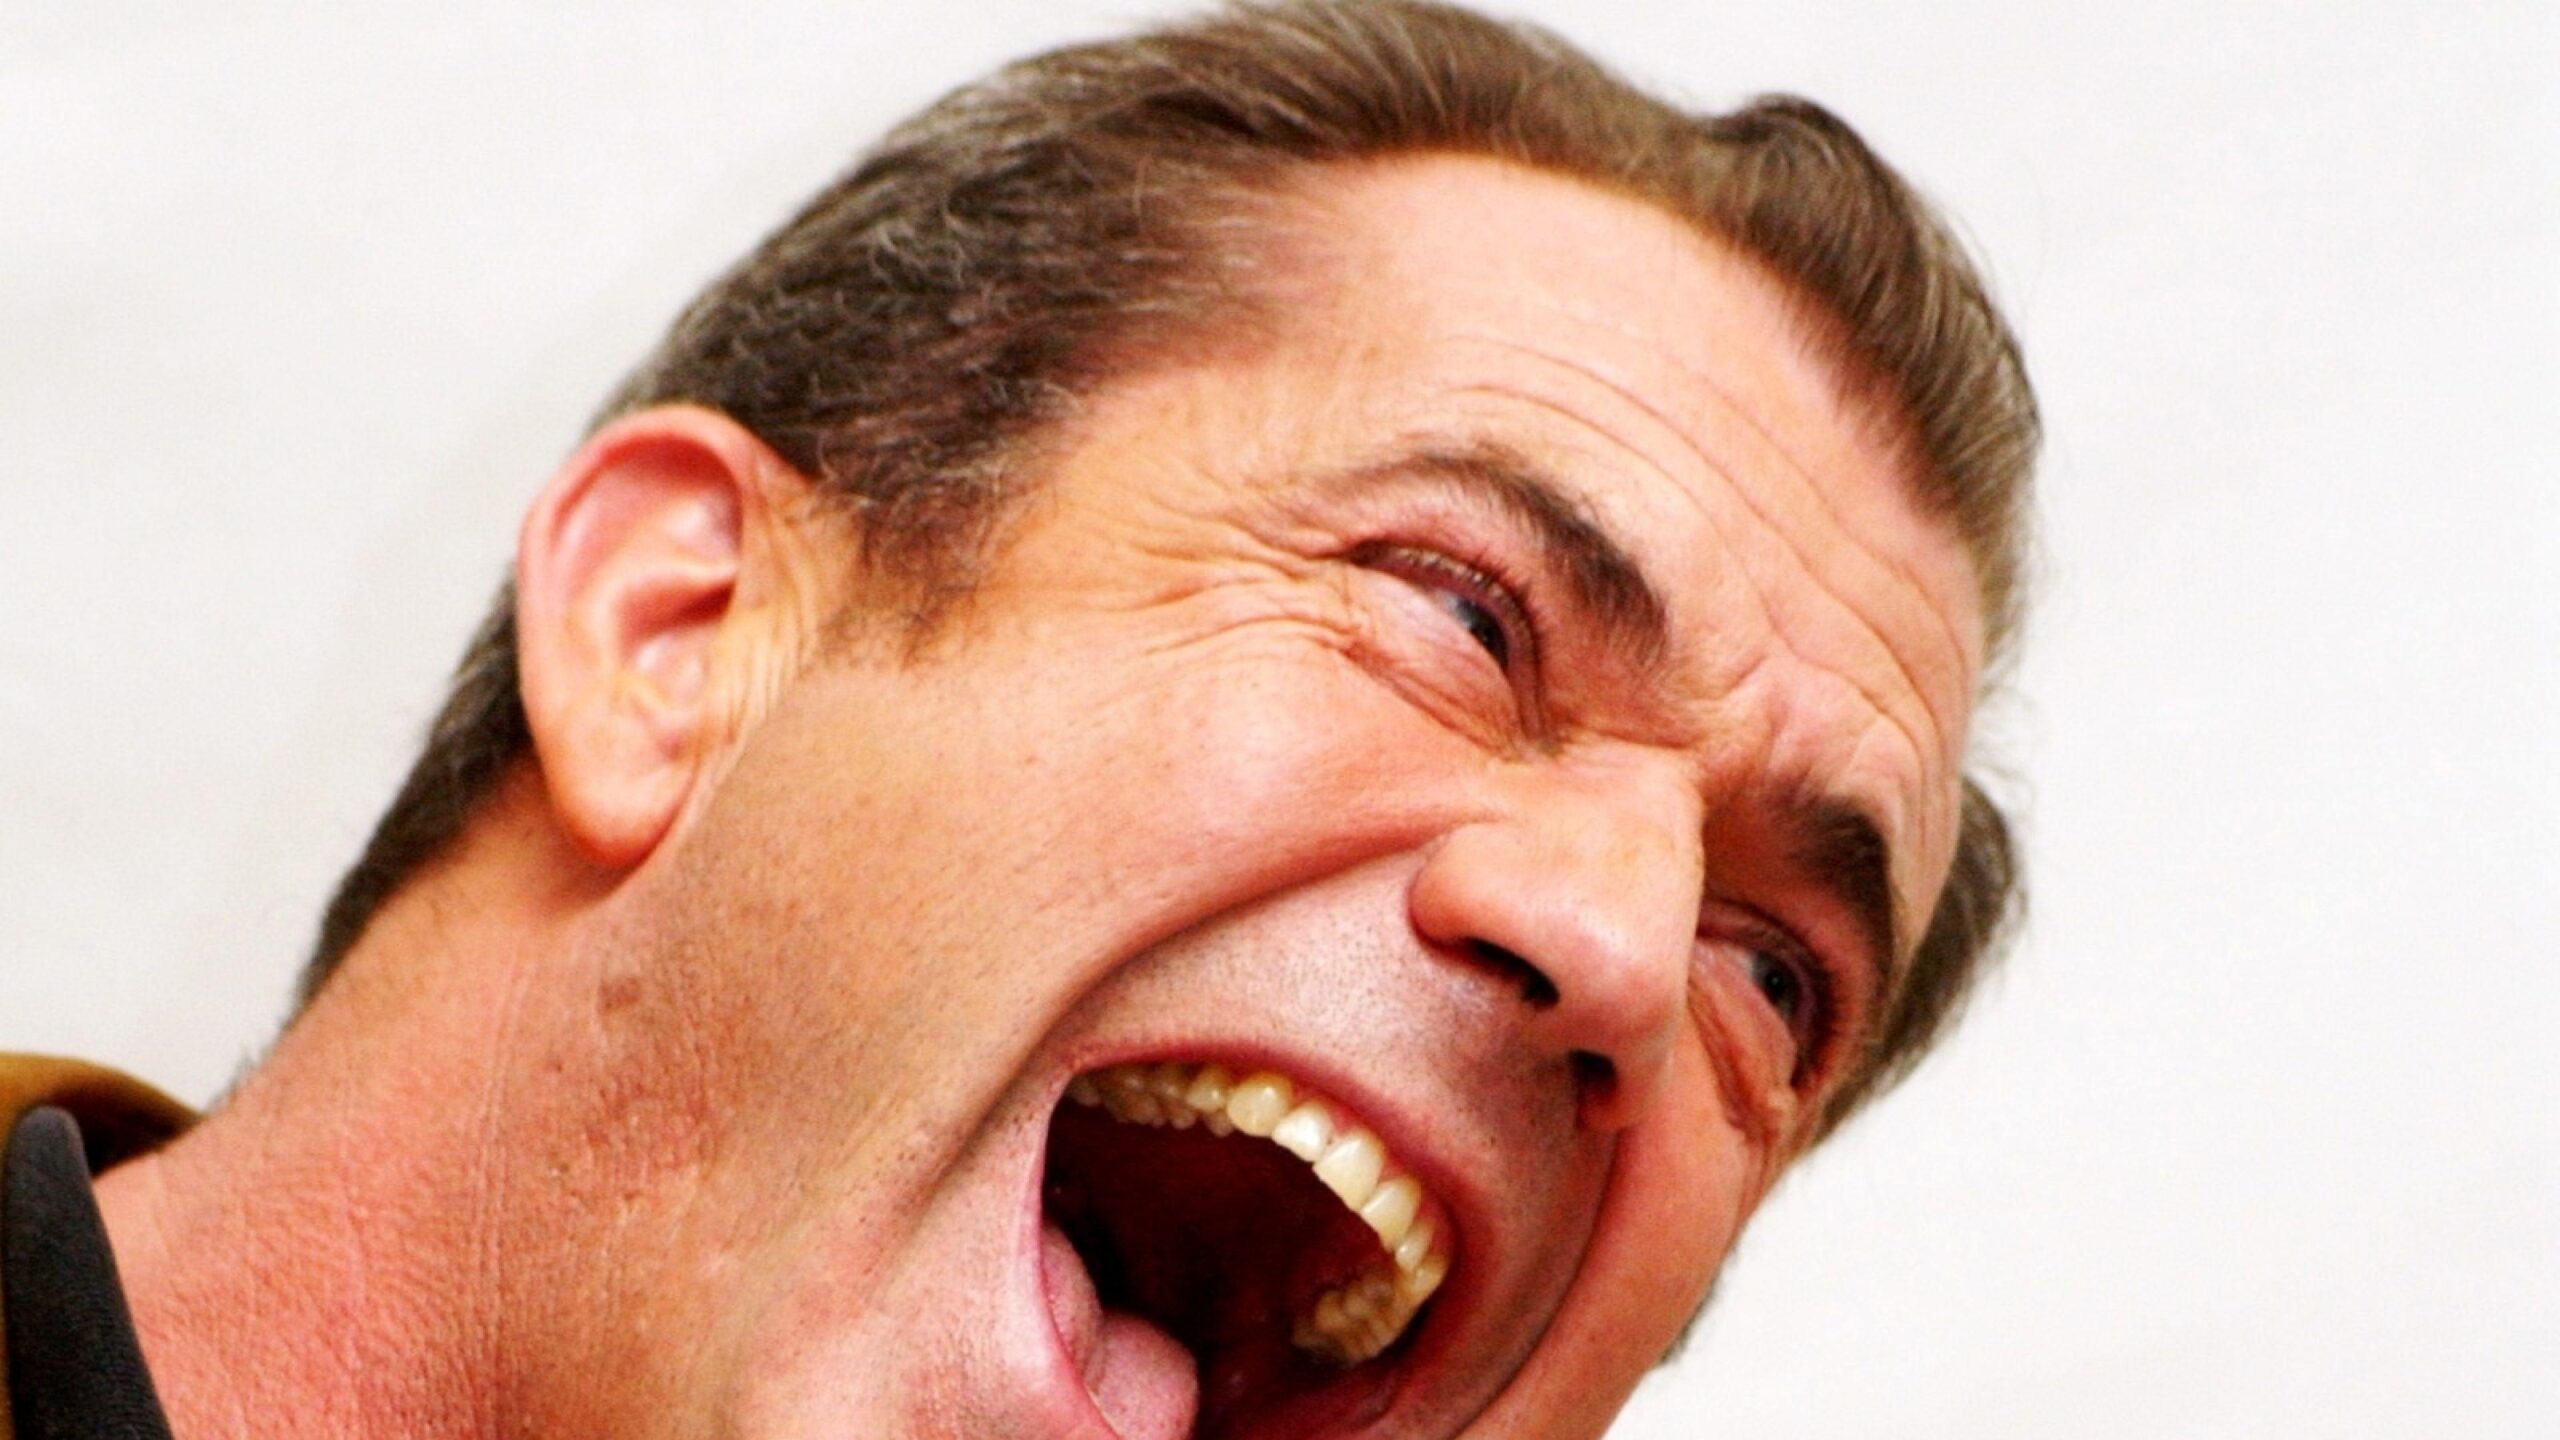 Download Wallpapers Mel gibson, Laugh, Mouth, Teeth K